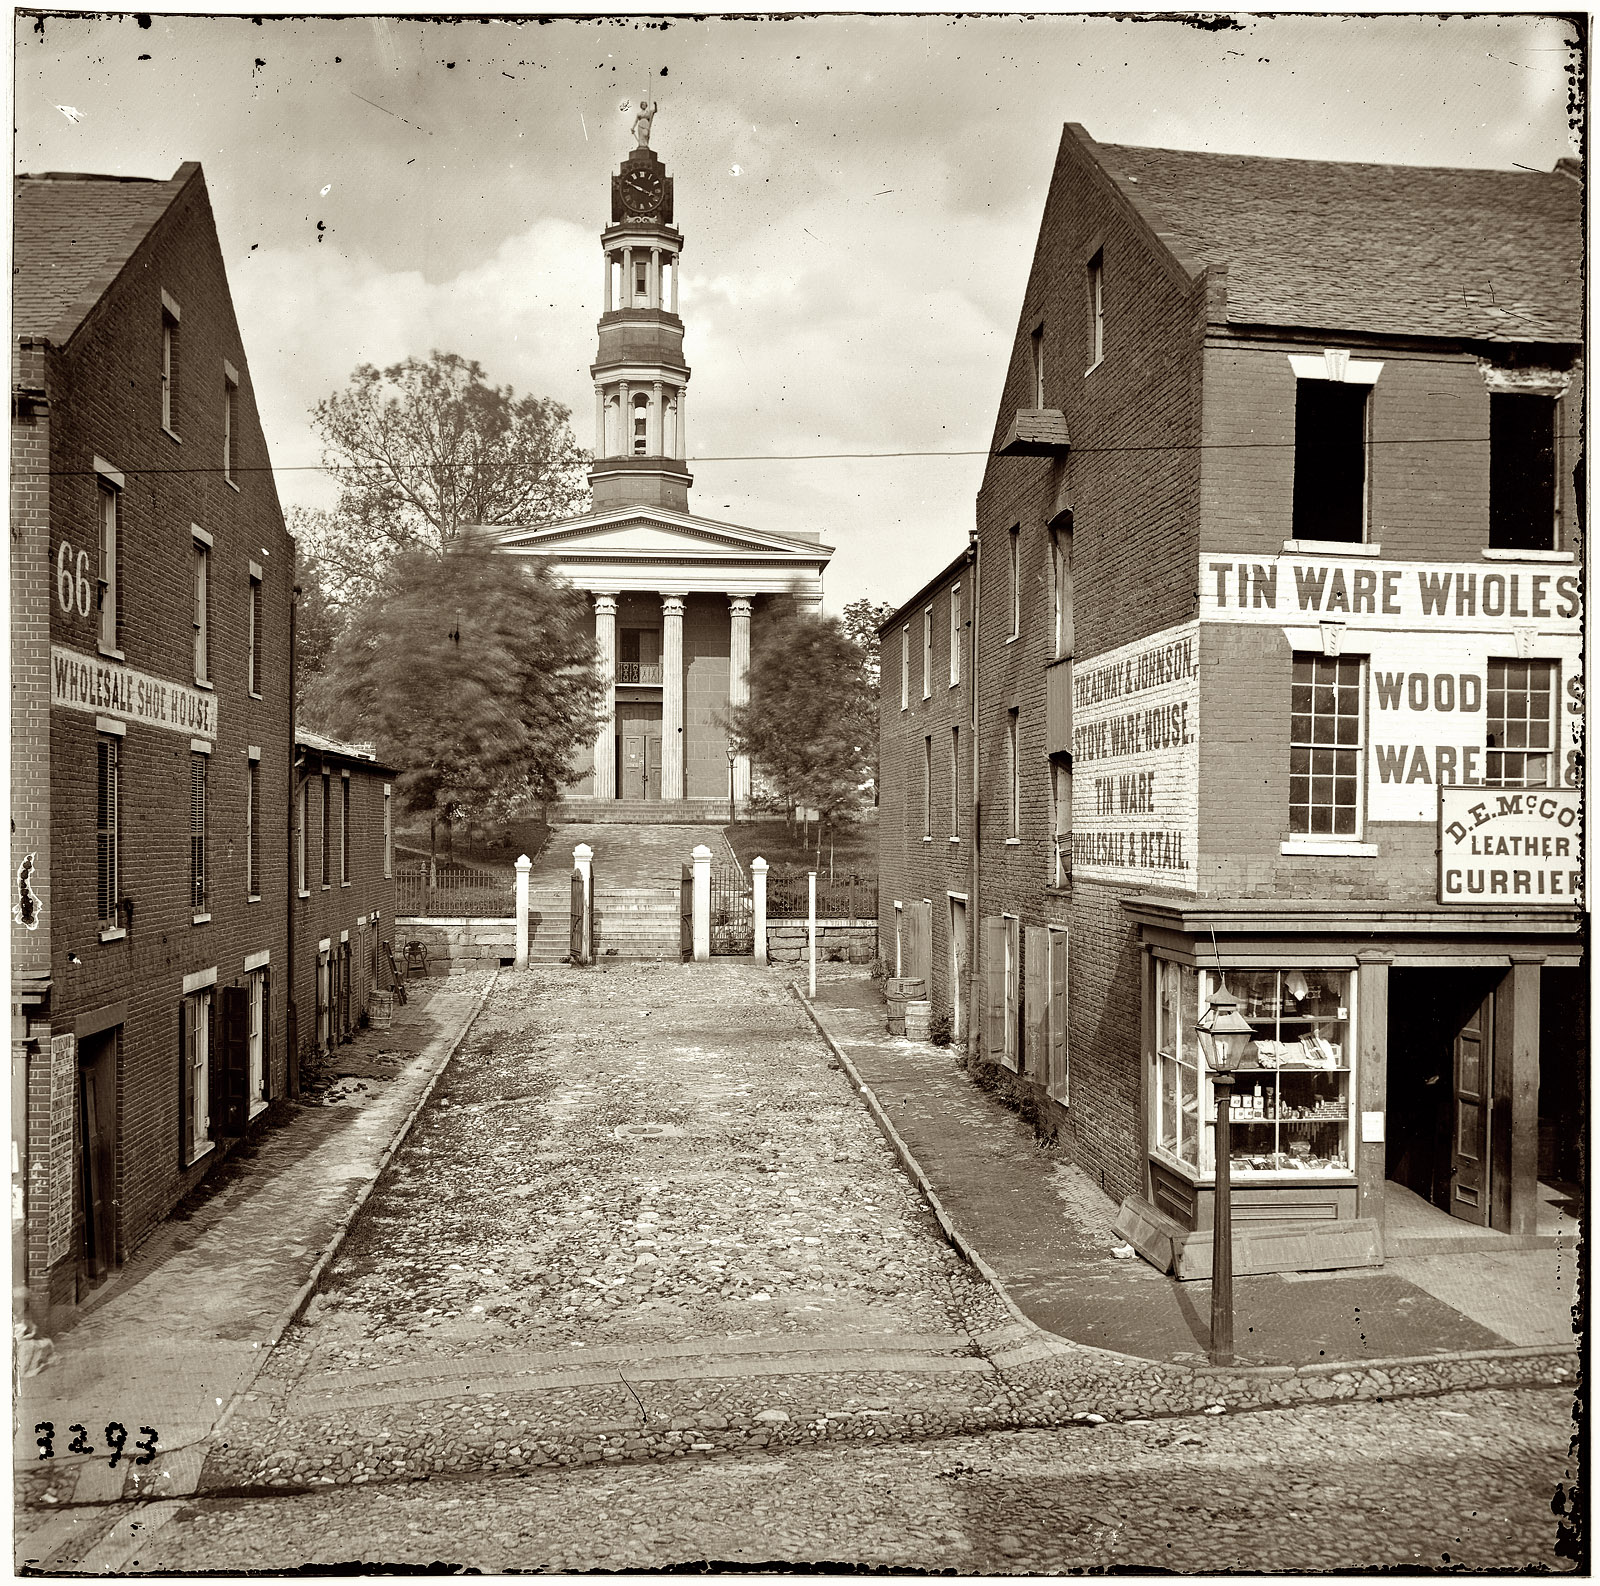 The Petersburg, Virginia, courthouse in 1865. From photographs of the main Eastern theater of war, the siege of Petersburg, June 1864-April 1865. Glass plate negative, right half of stereograph pair. Photographer unknown. View full size.